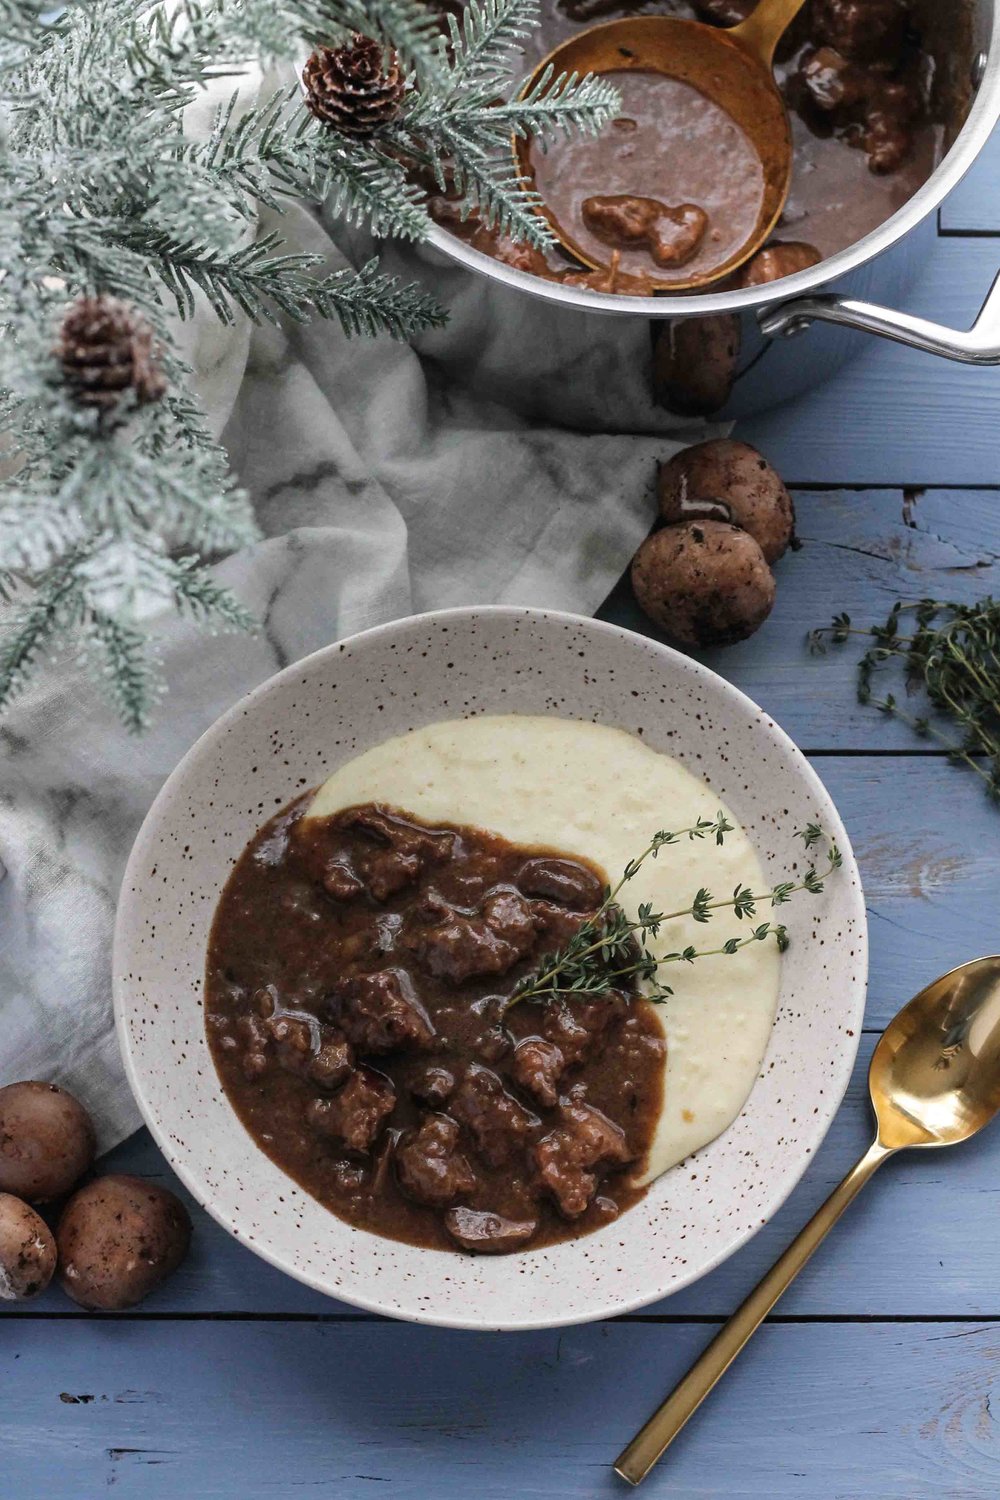 Classic+beef+and+mushroom+stew+becomes+the+perfect+cozy,+winter+meal+when+ladled+over+a+spoonful+of+brown+butter+mashed+potatoes.++[www.pedanticfoodie.jpg